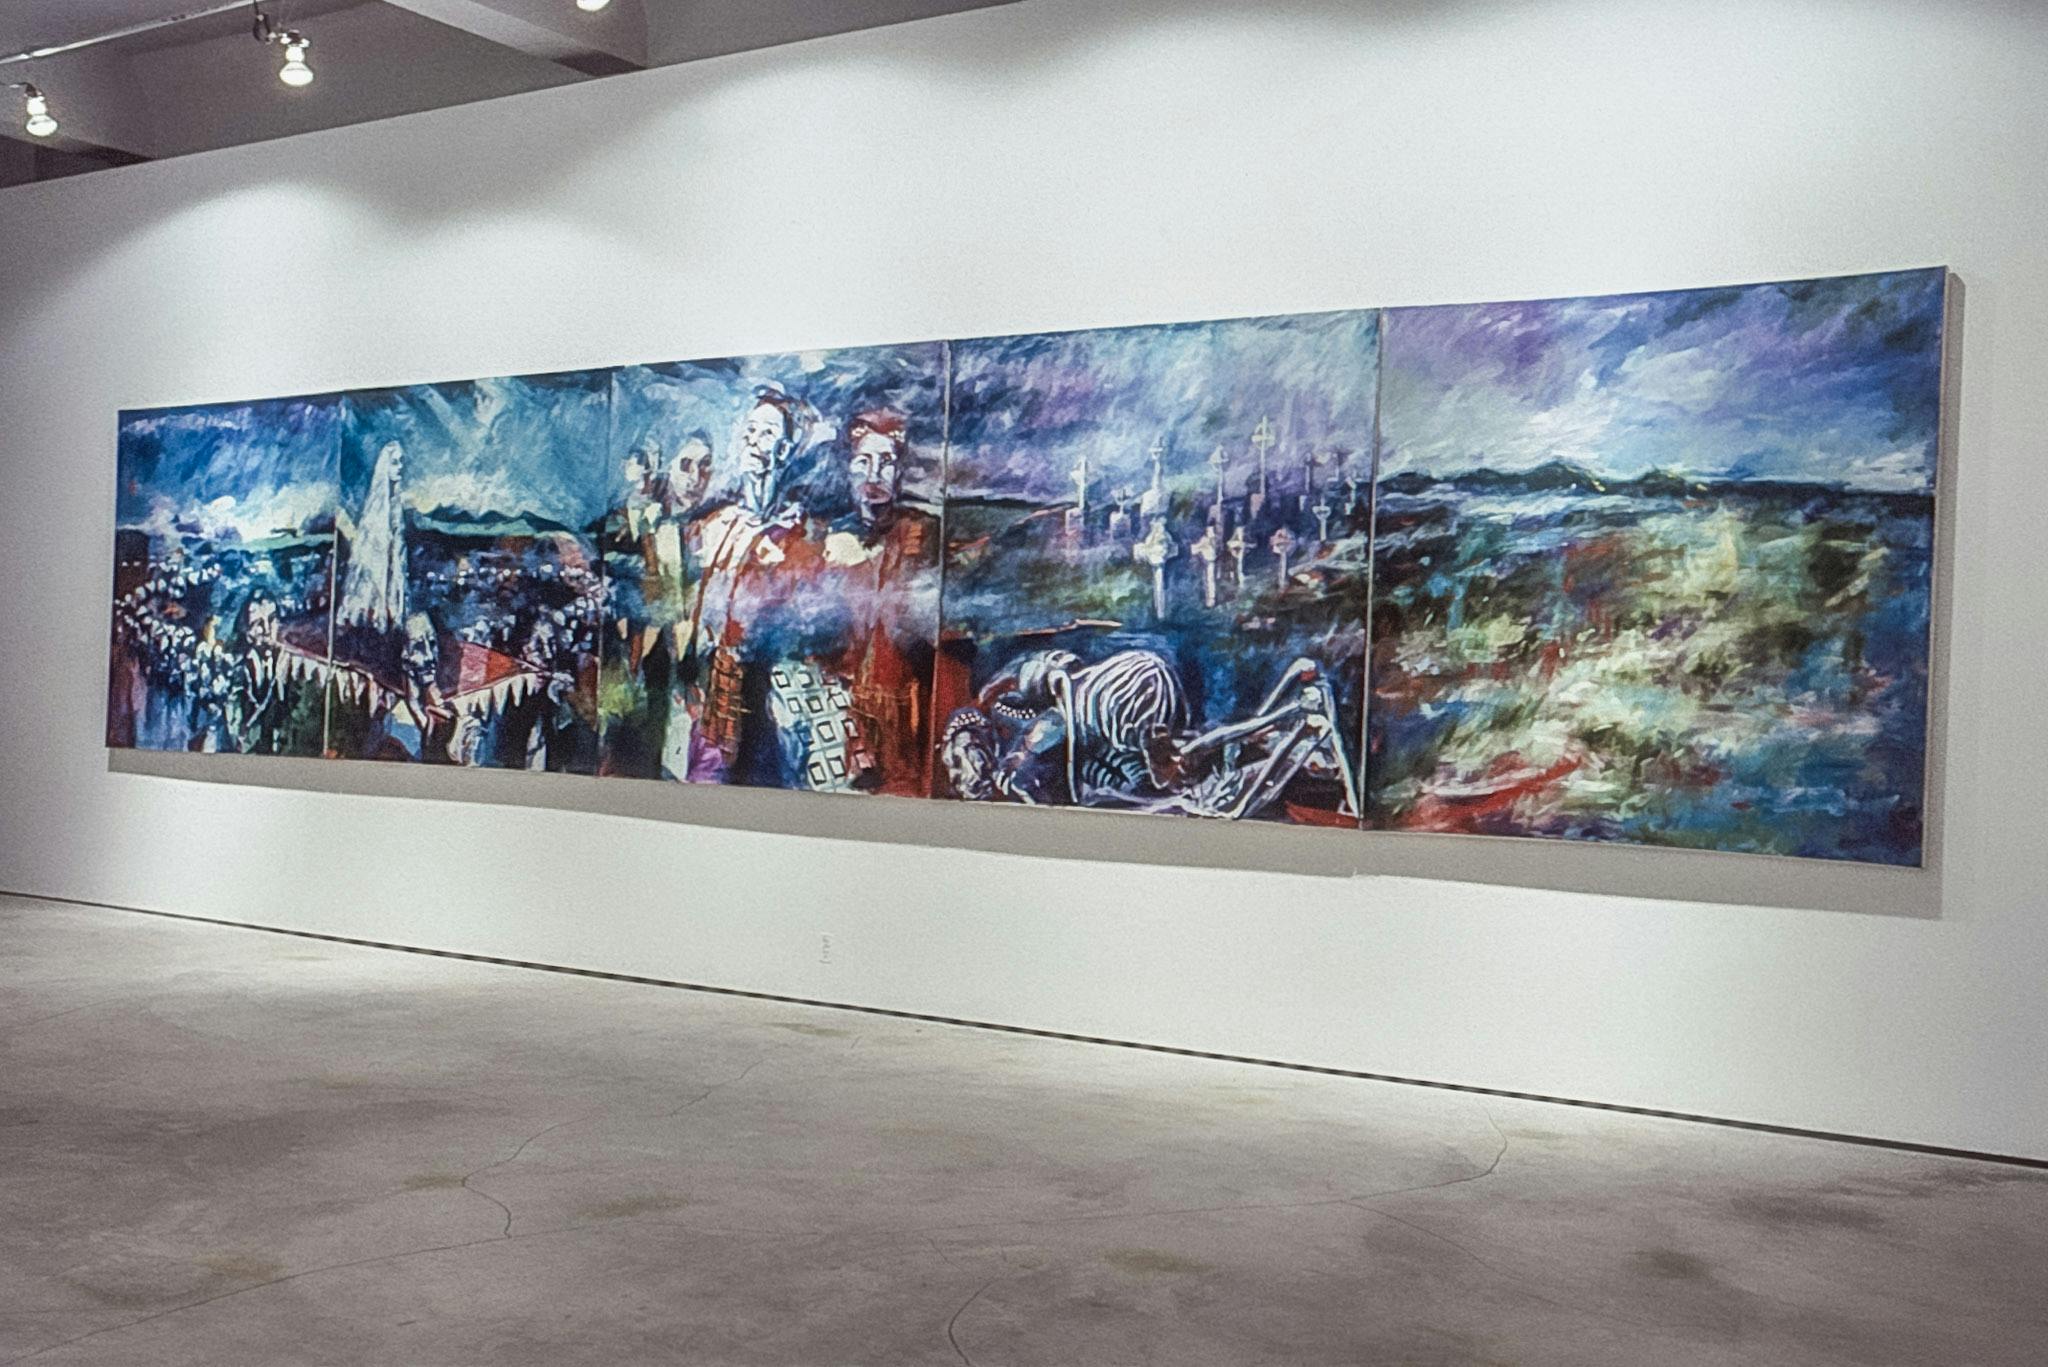 A large painting with greens, purples, reds, and blues, takes up most of a wall in a gallery space. The painting is made of 5 separate canvases, and depicts several skeletons and ghostly people.